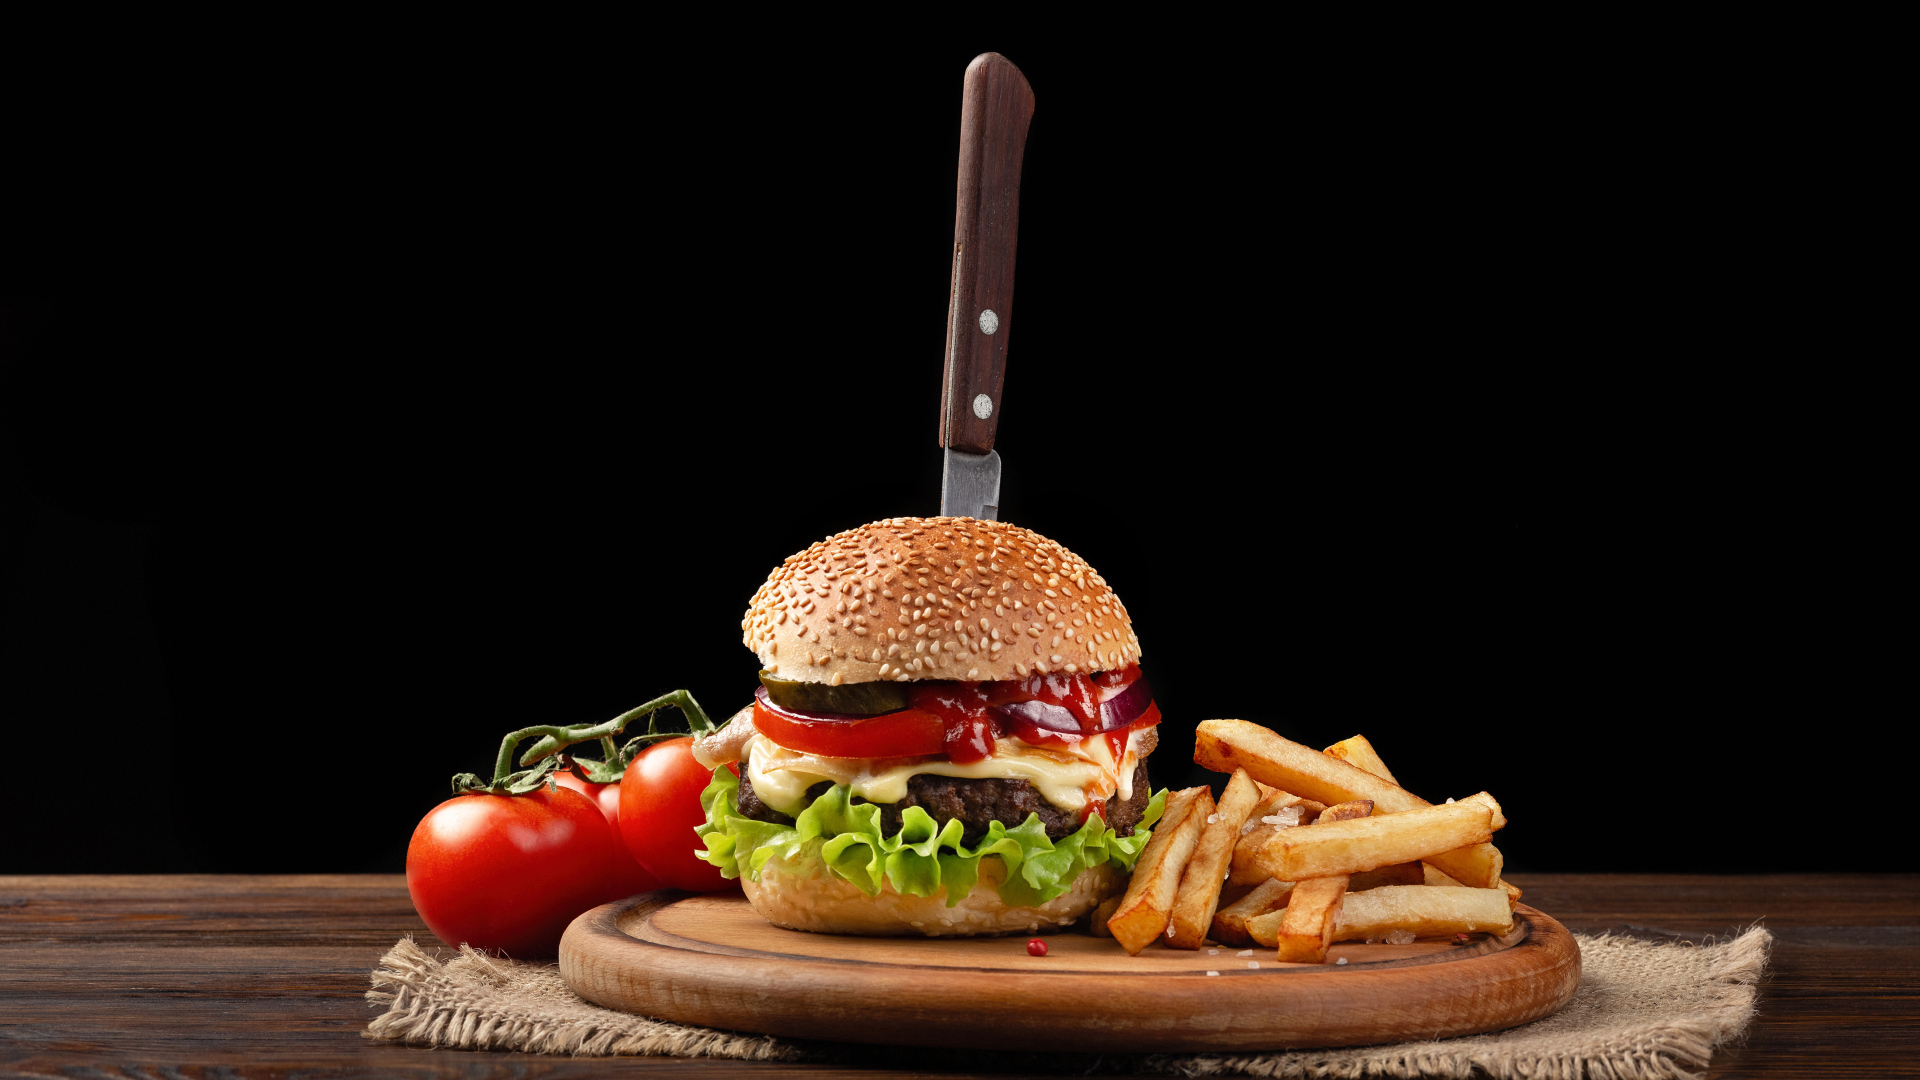 Hamburger with a knife on the table with tomatoes and fries